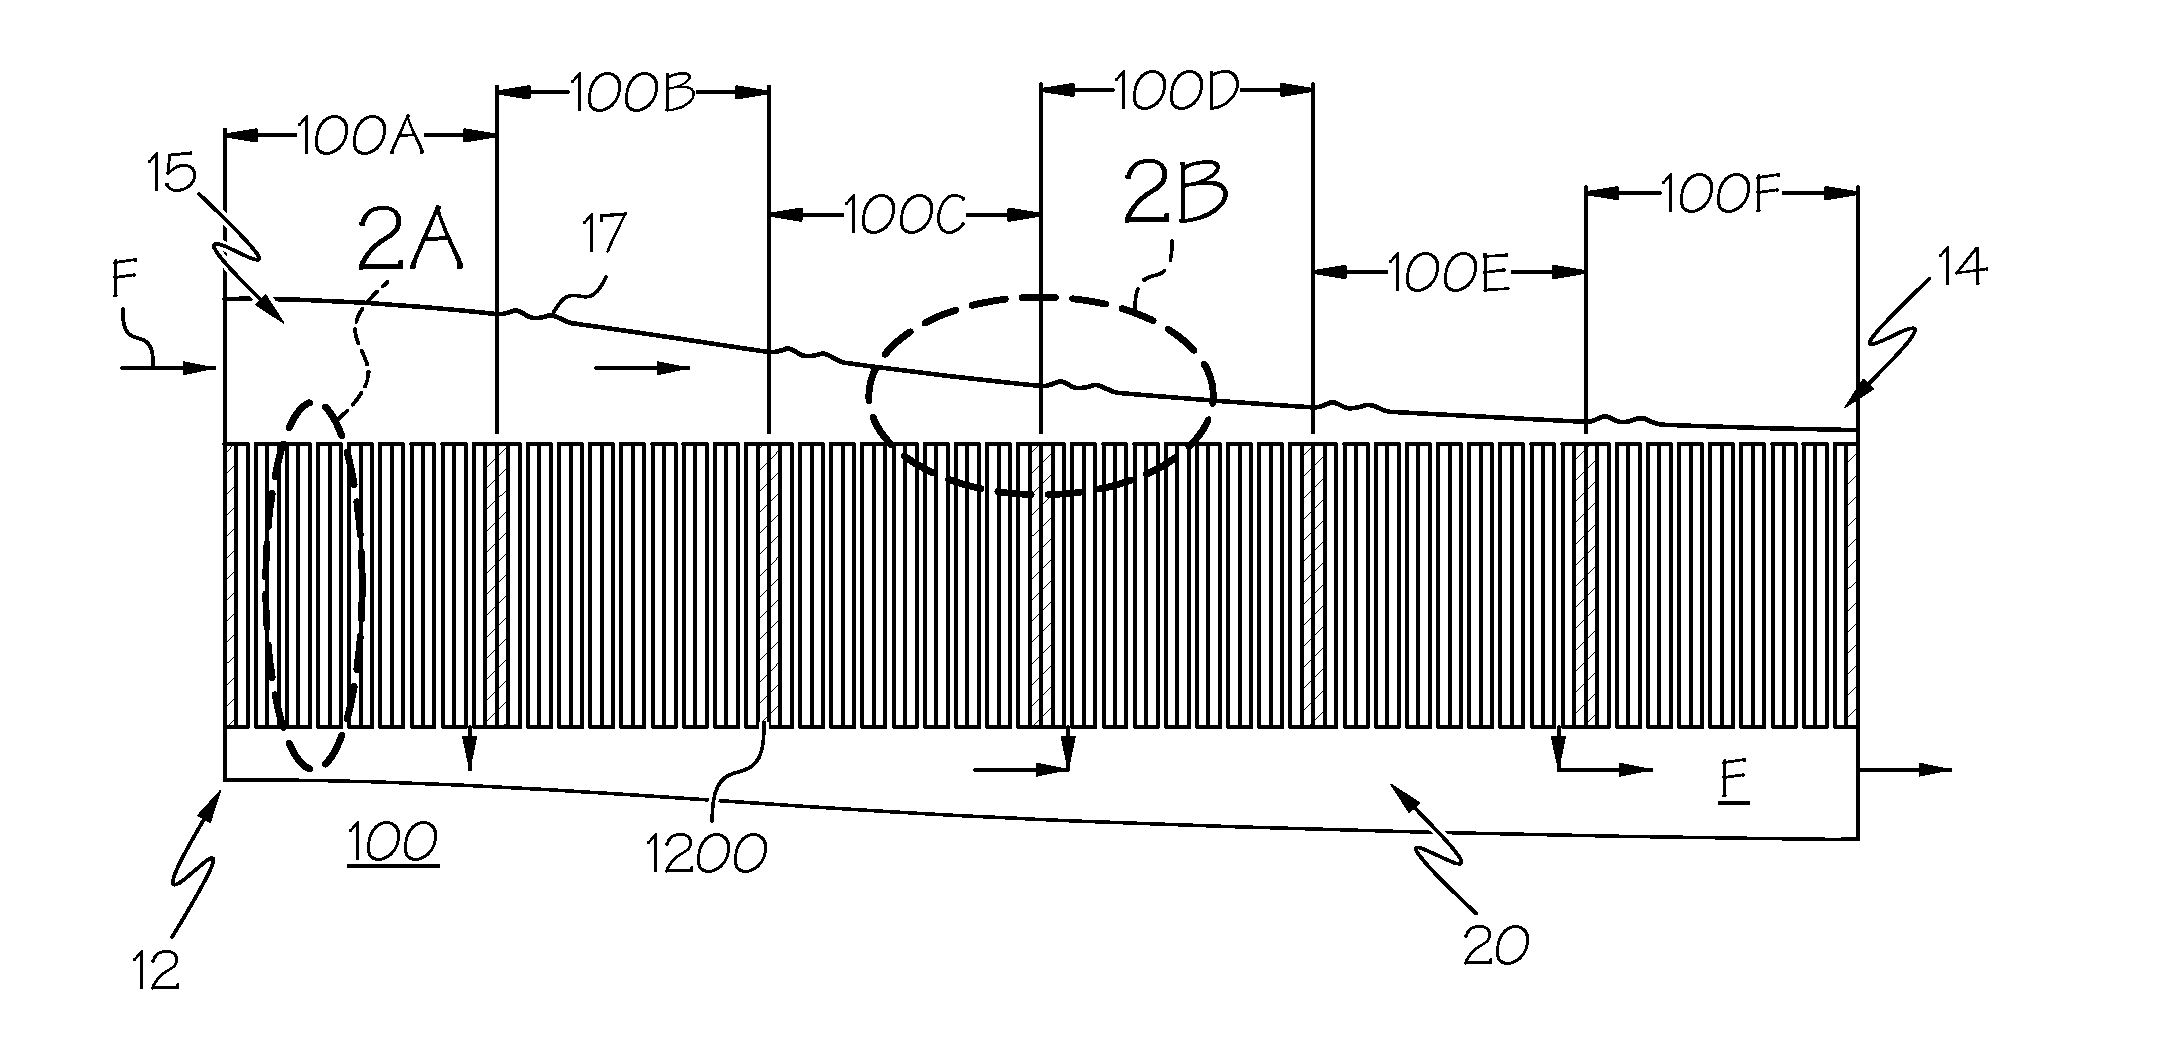 Flow uniformity of air-cooled battery packs